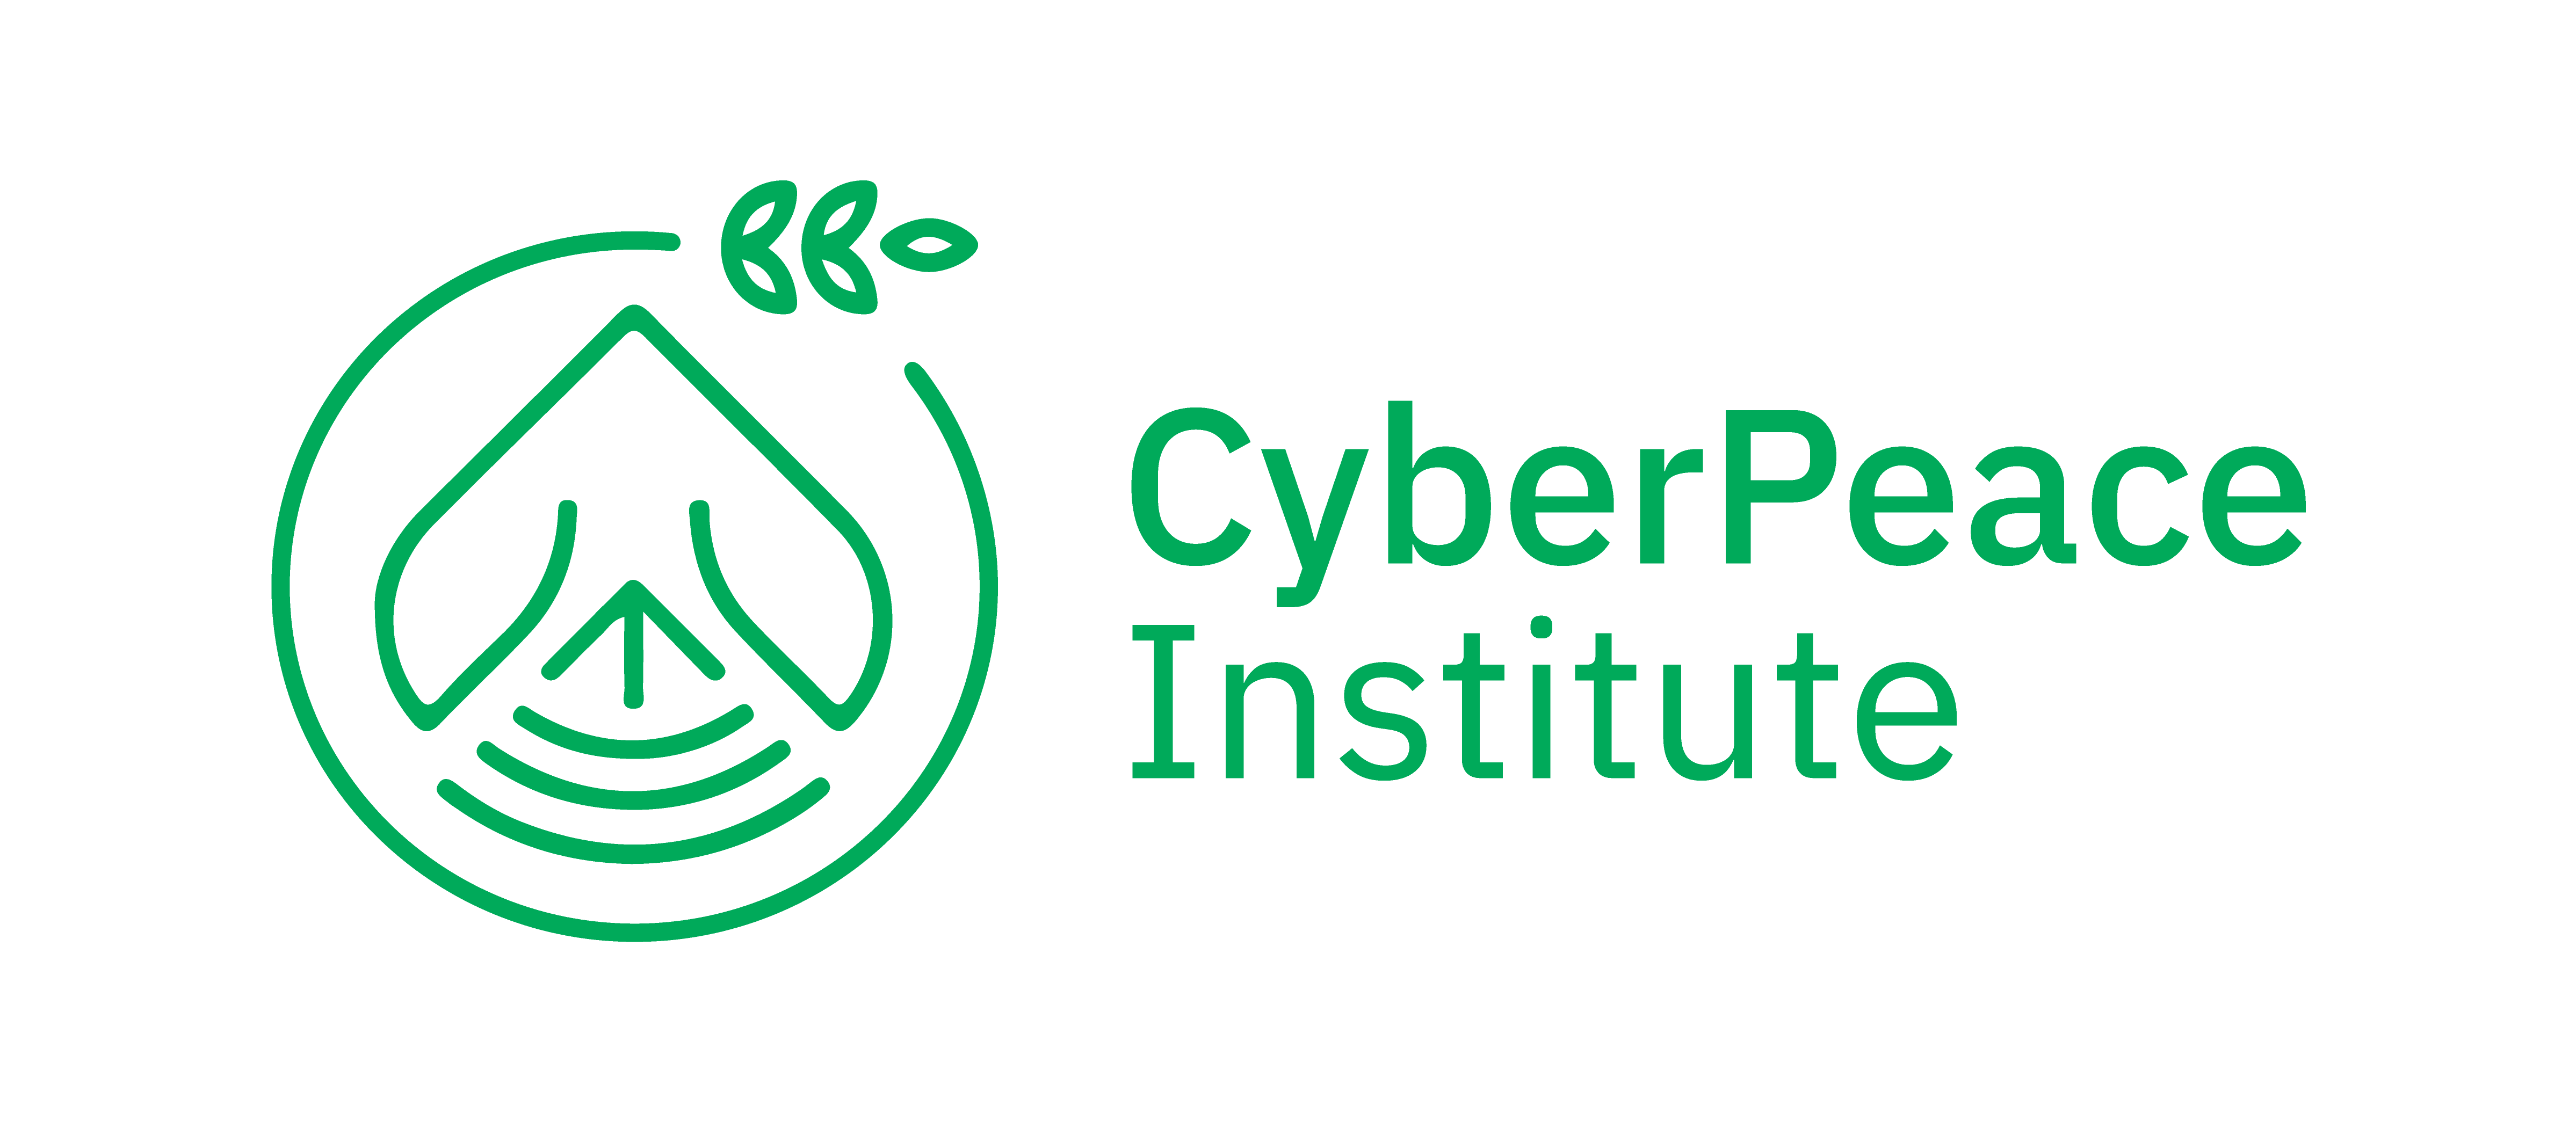 Criminals and hostile states attack healthcare with impunity; the CyberPeace Institute calls for accountability